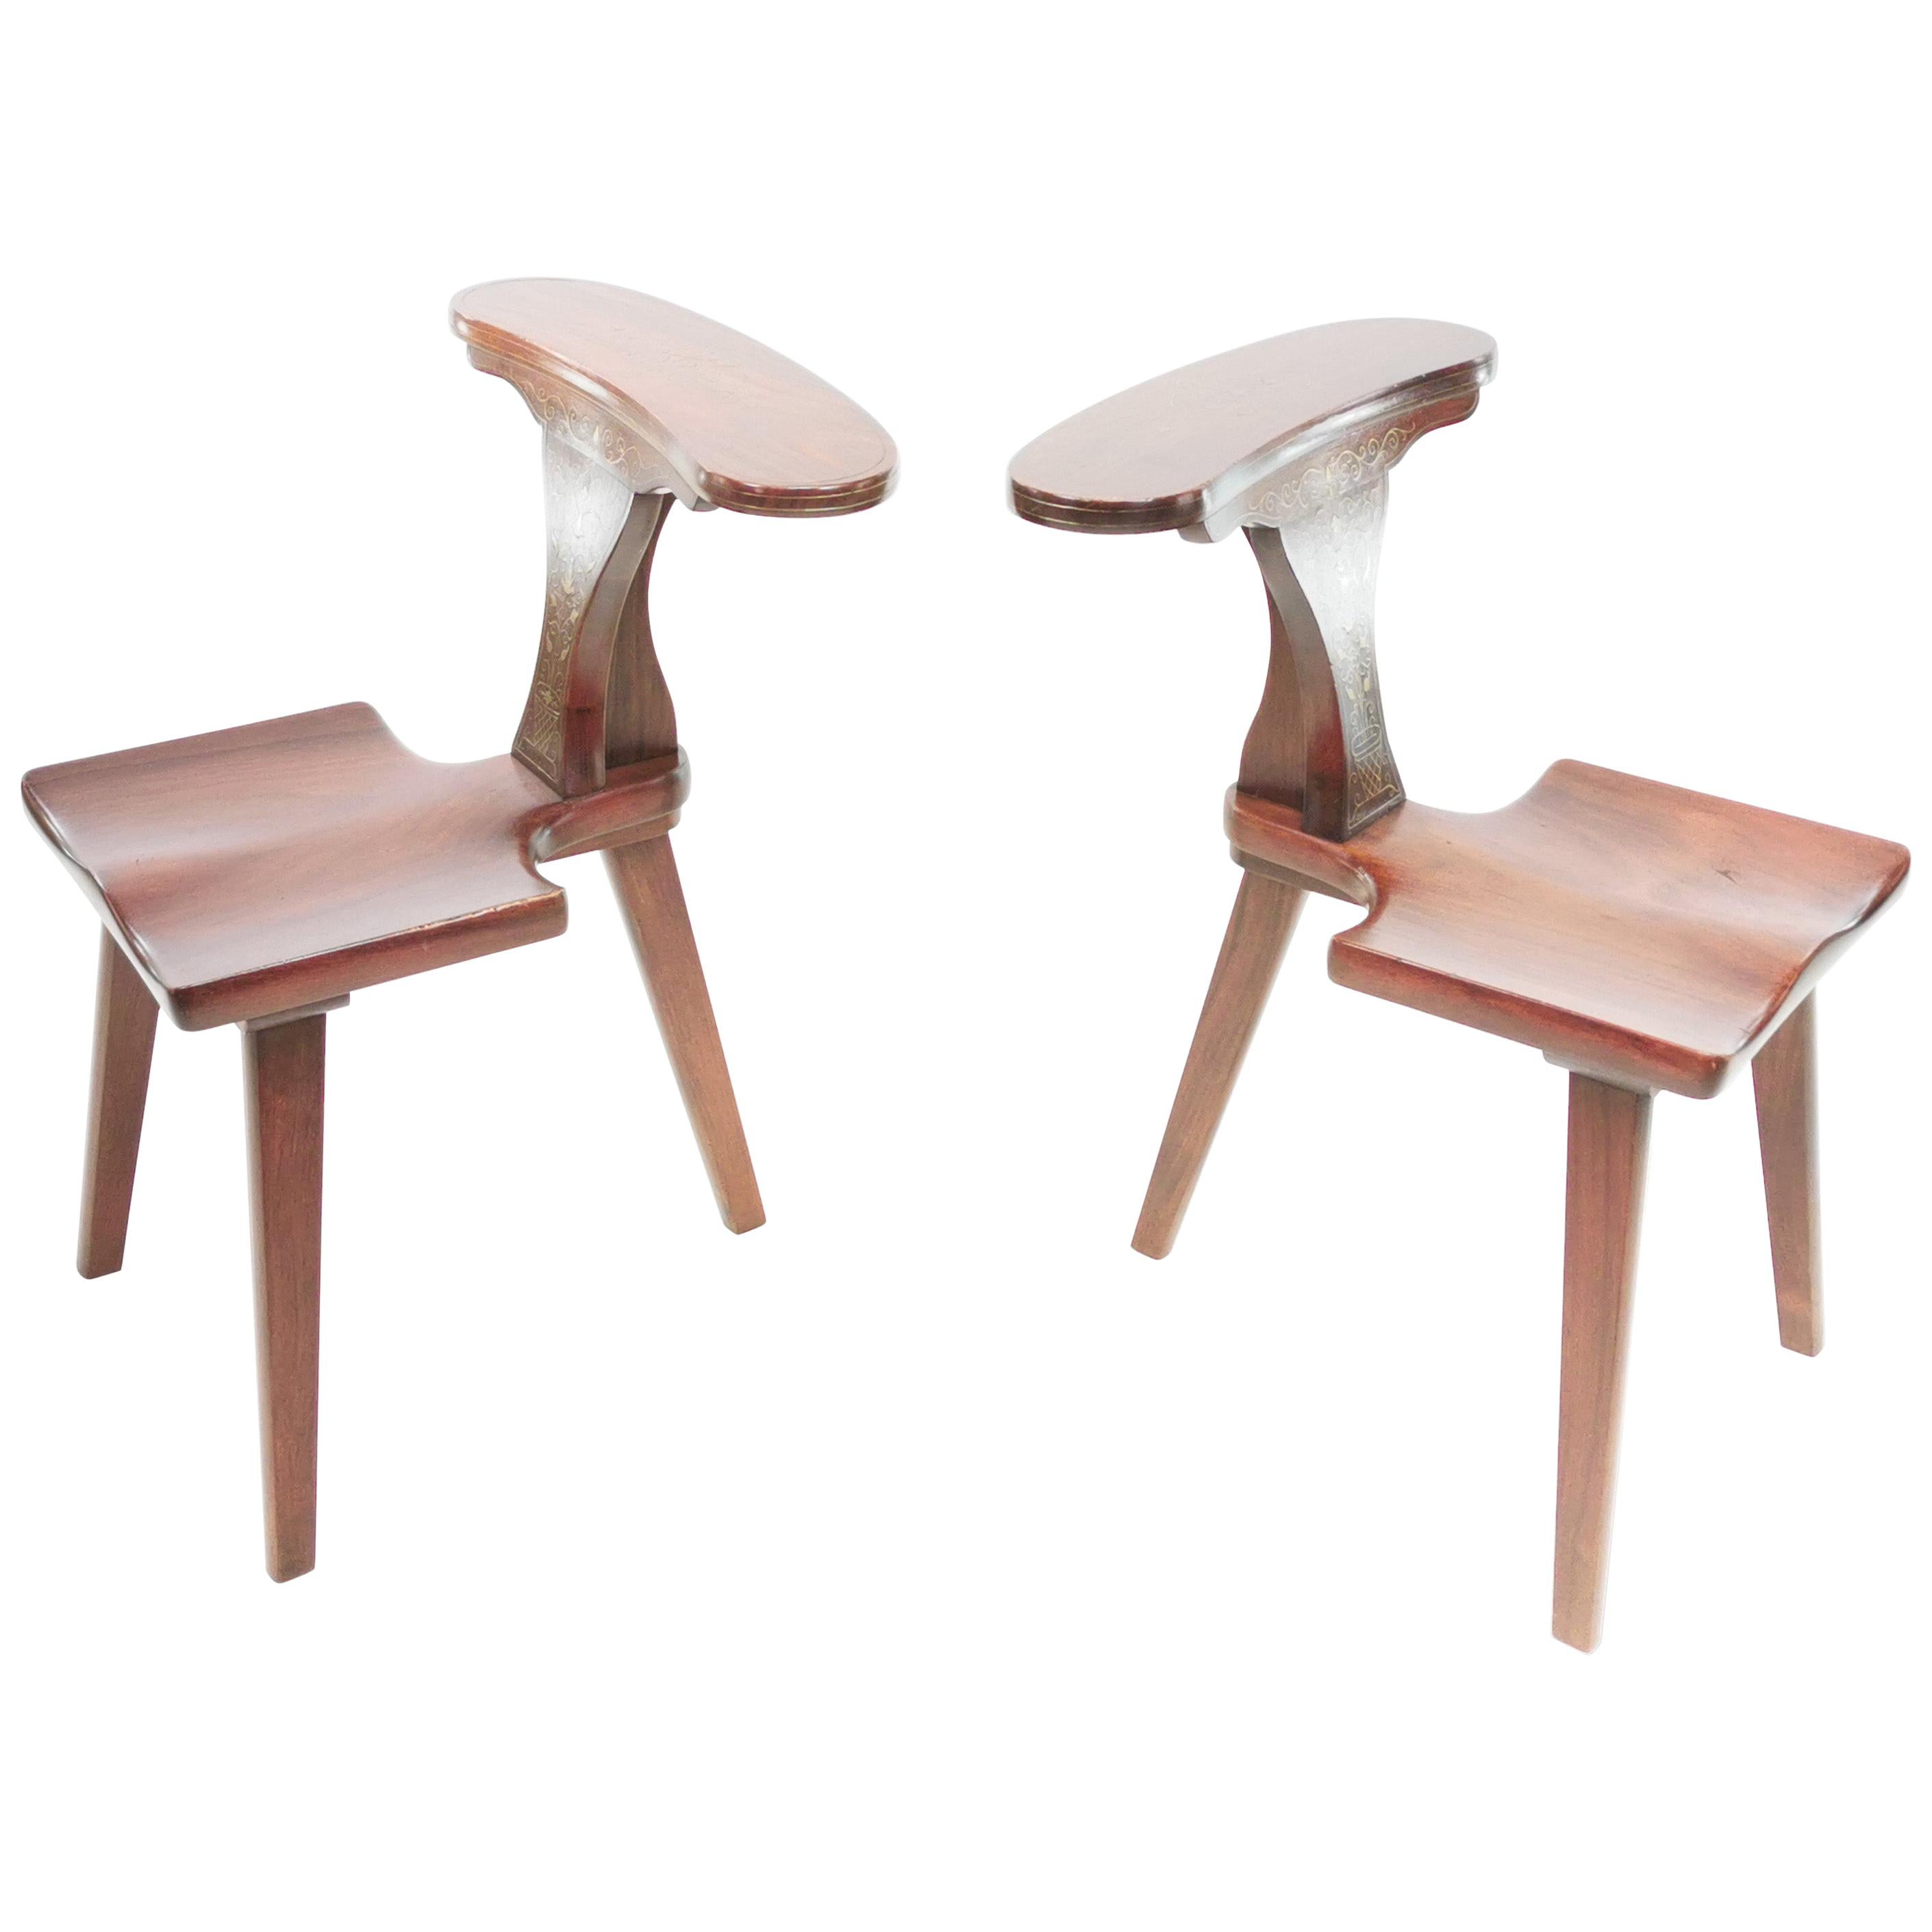 Pair of Cockfighting Chairs by M. Hayat & Bros, Mid Century